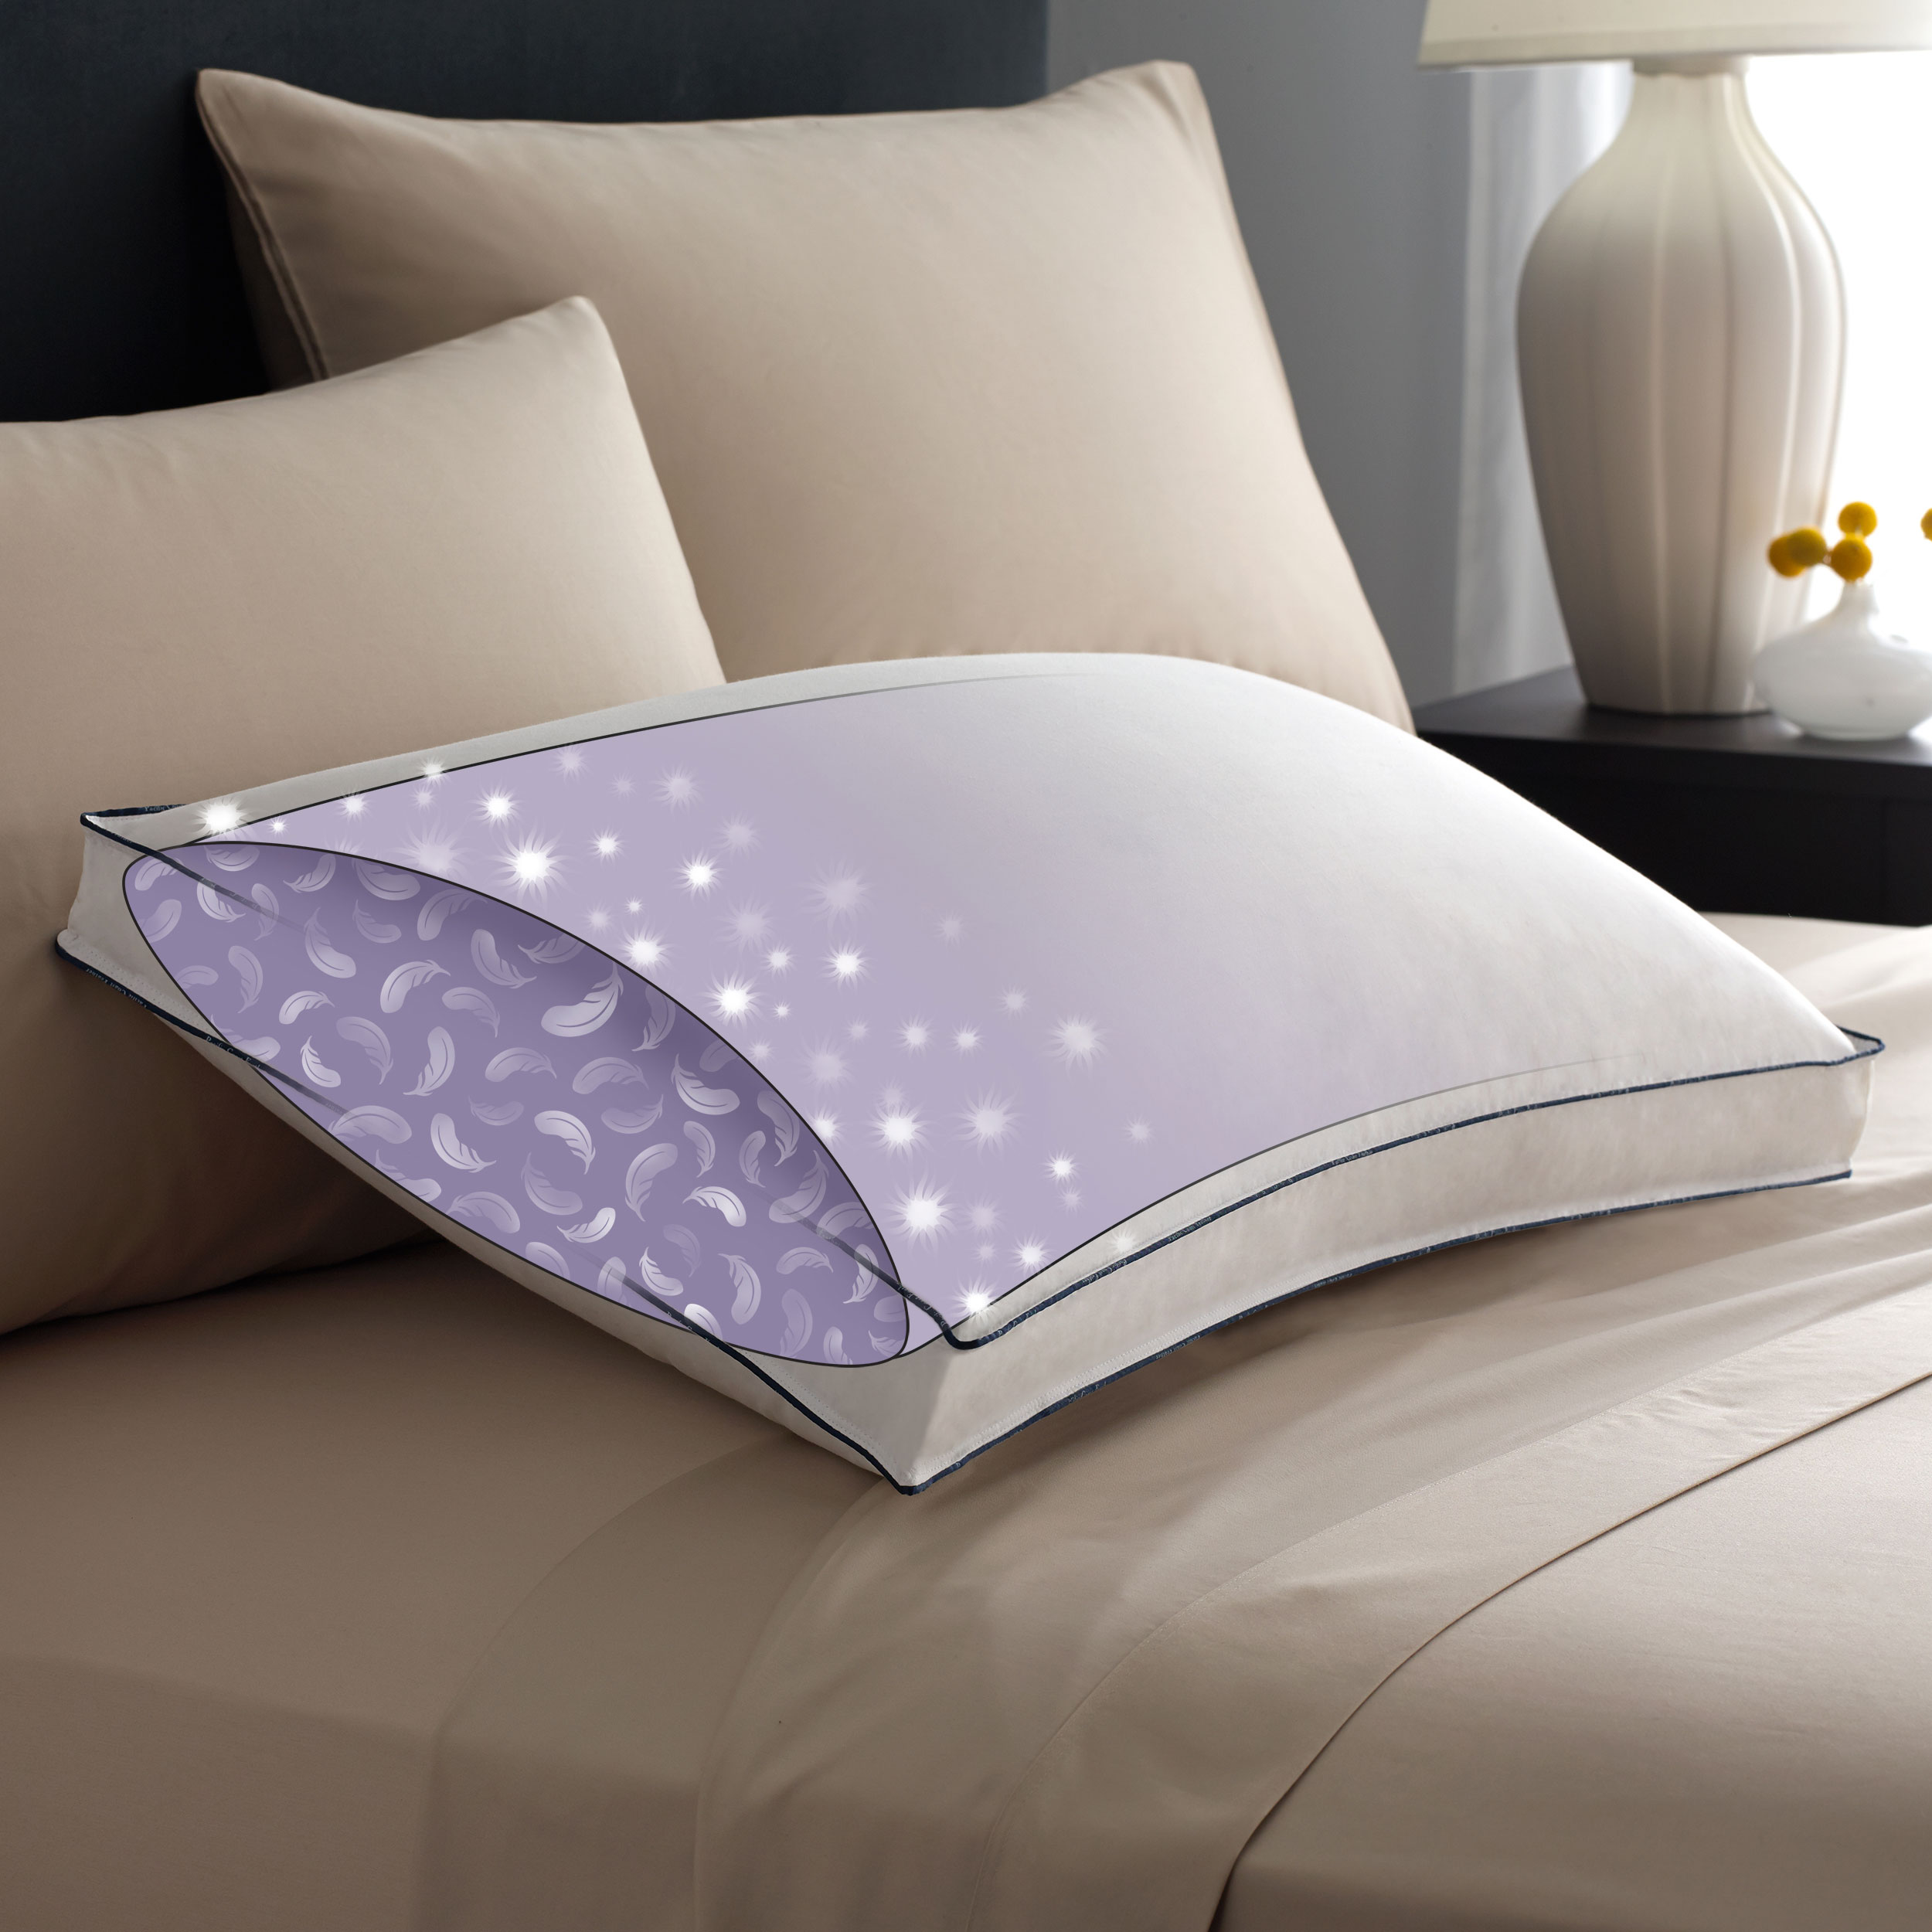 Pacific Coast Double Downaround Firm Pillow 300 Thread Count 550 Fill Power Down & Resilia Feathers - Queen